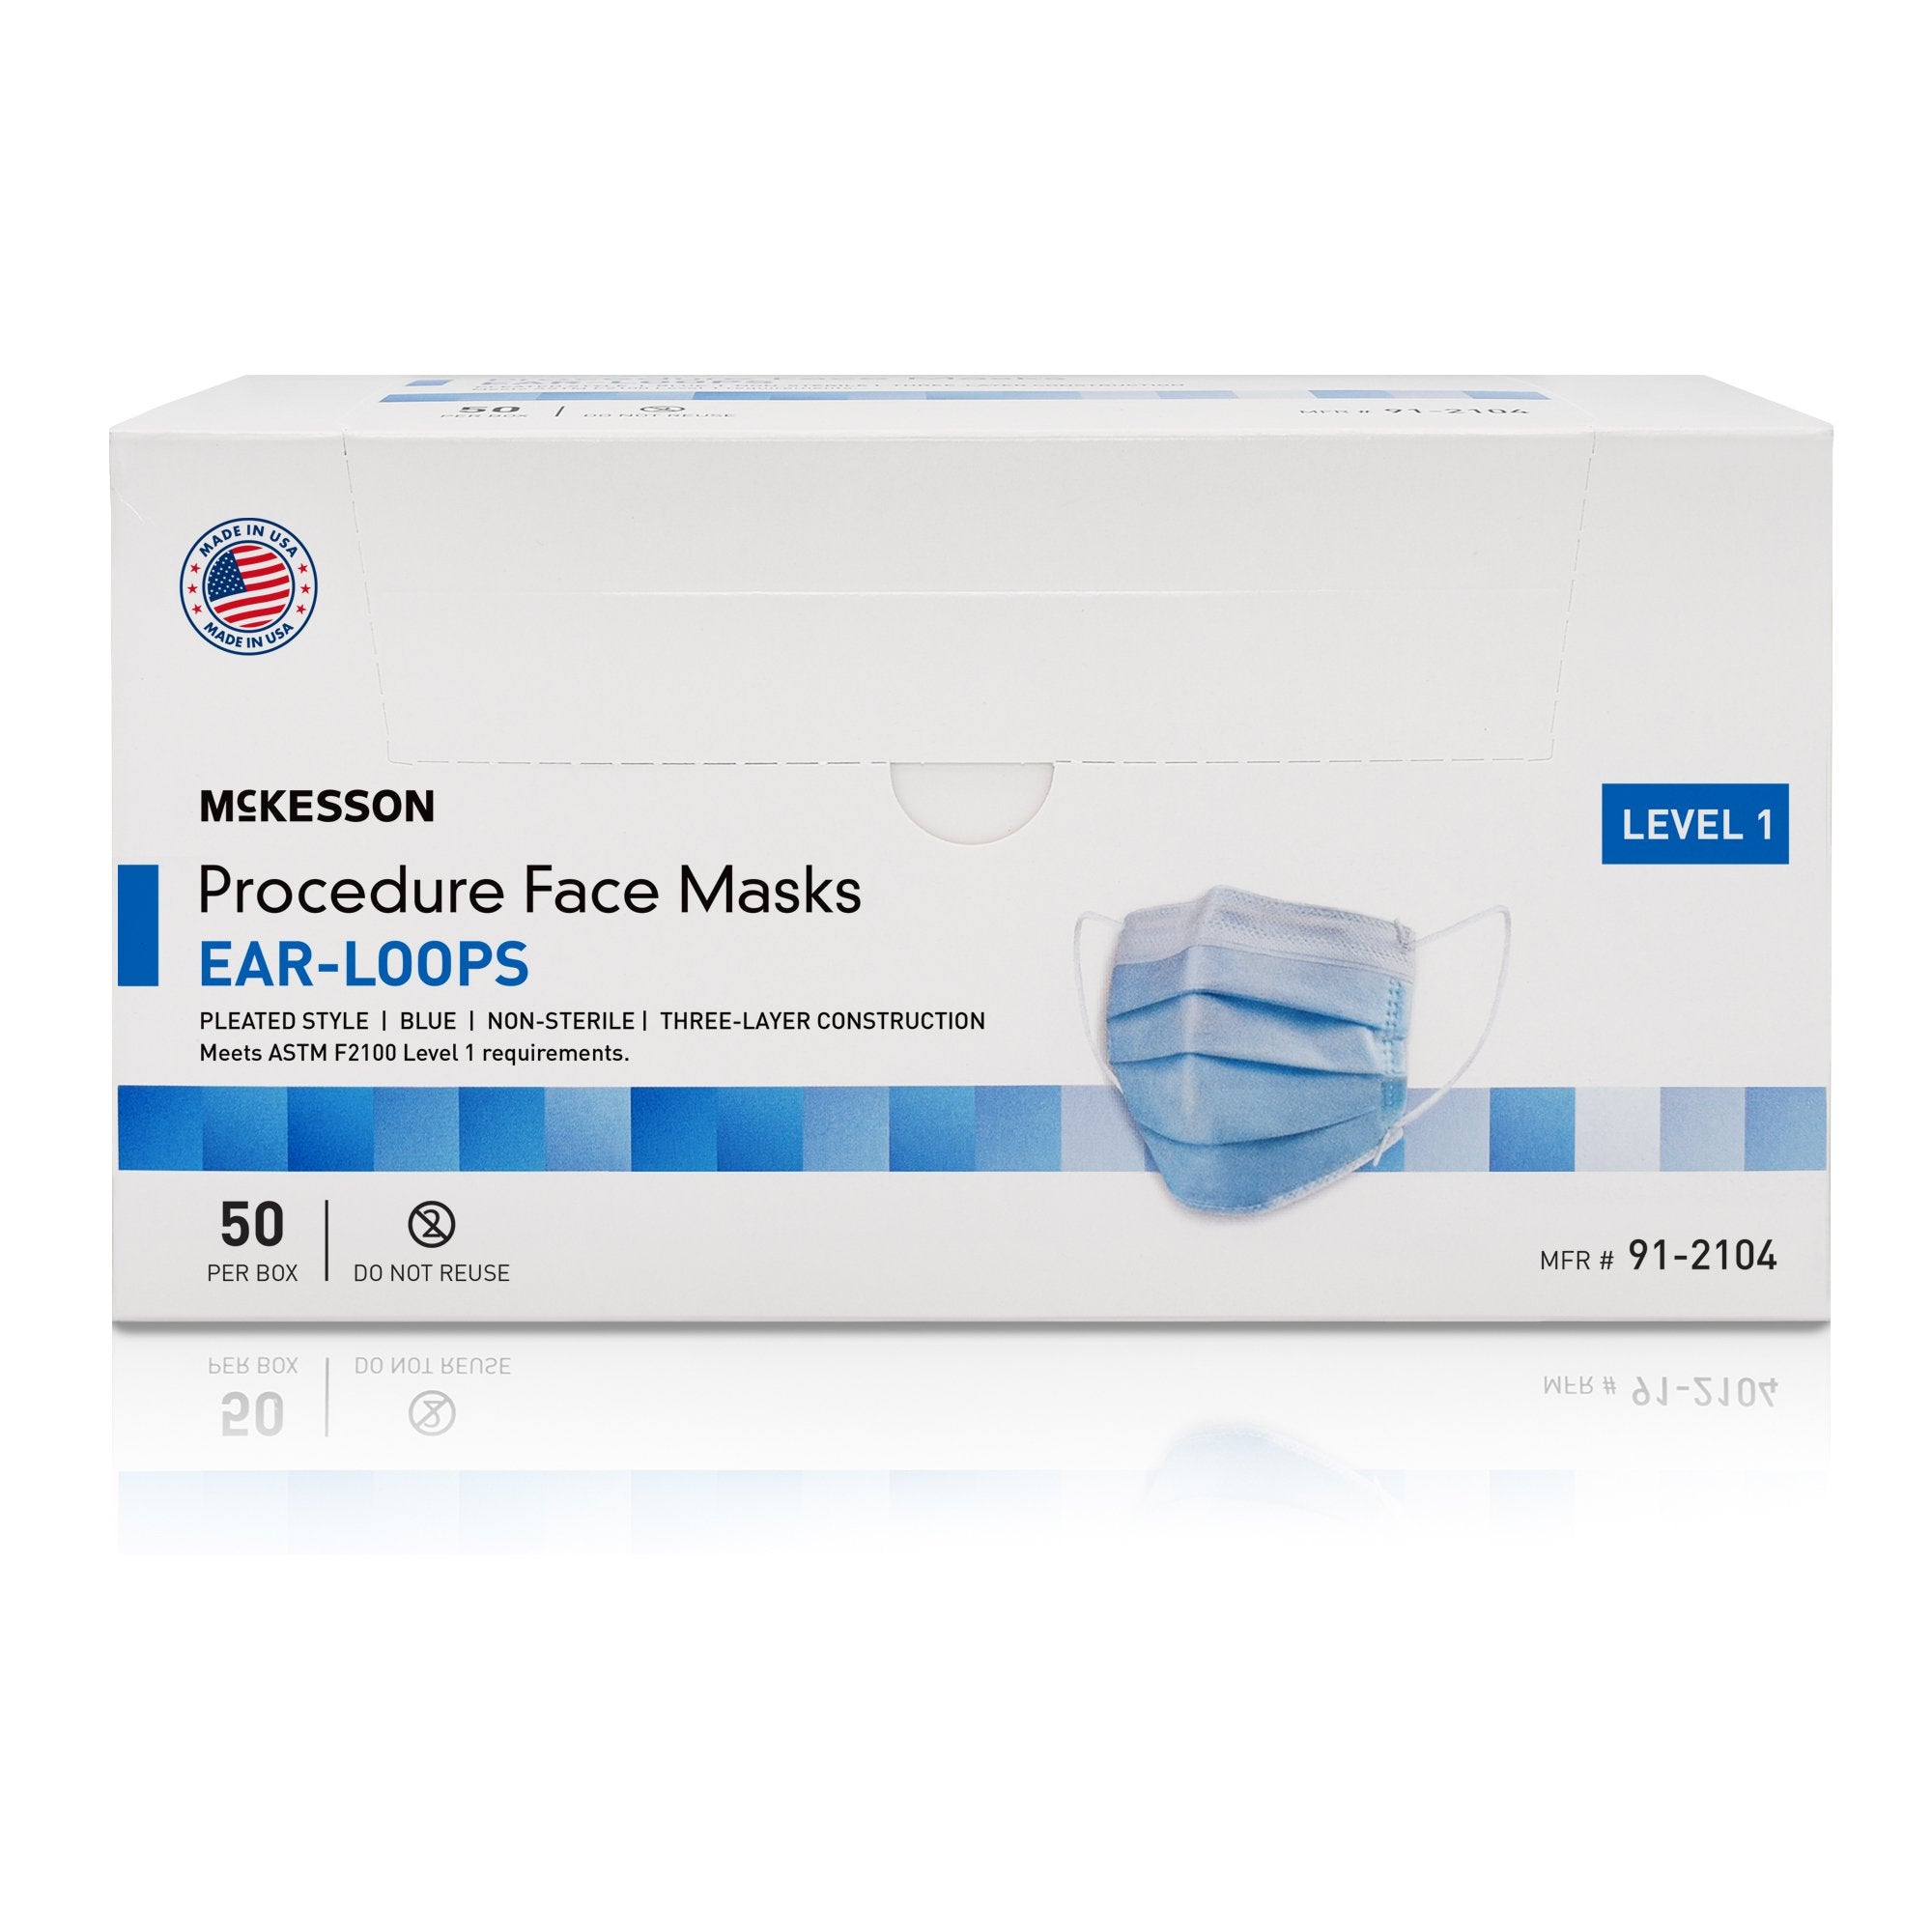 Procedure Mask McKesson Earloops One Size Fits Most Blue NonSterile ASTM Level 1 Adult